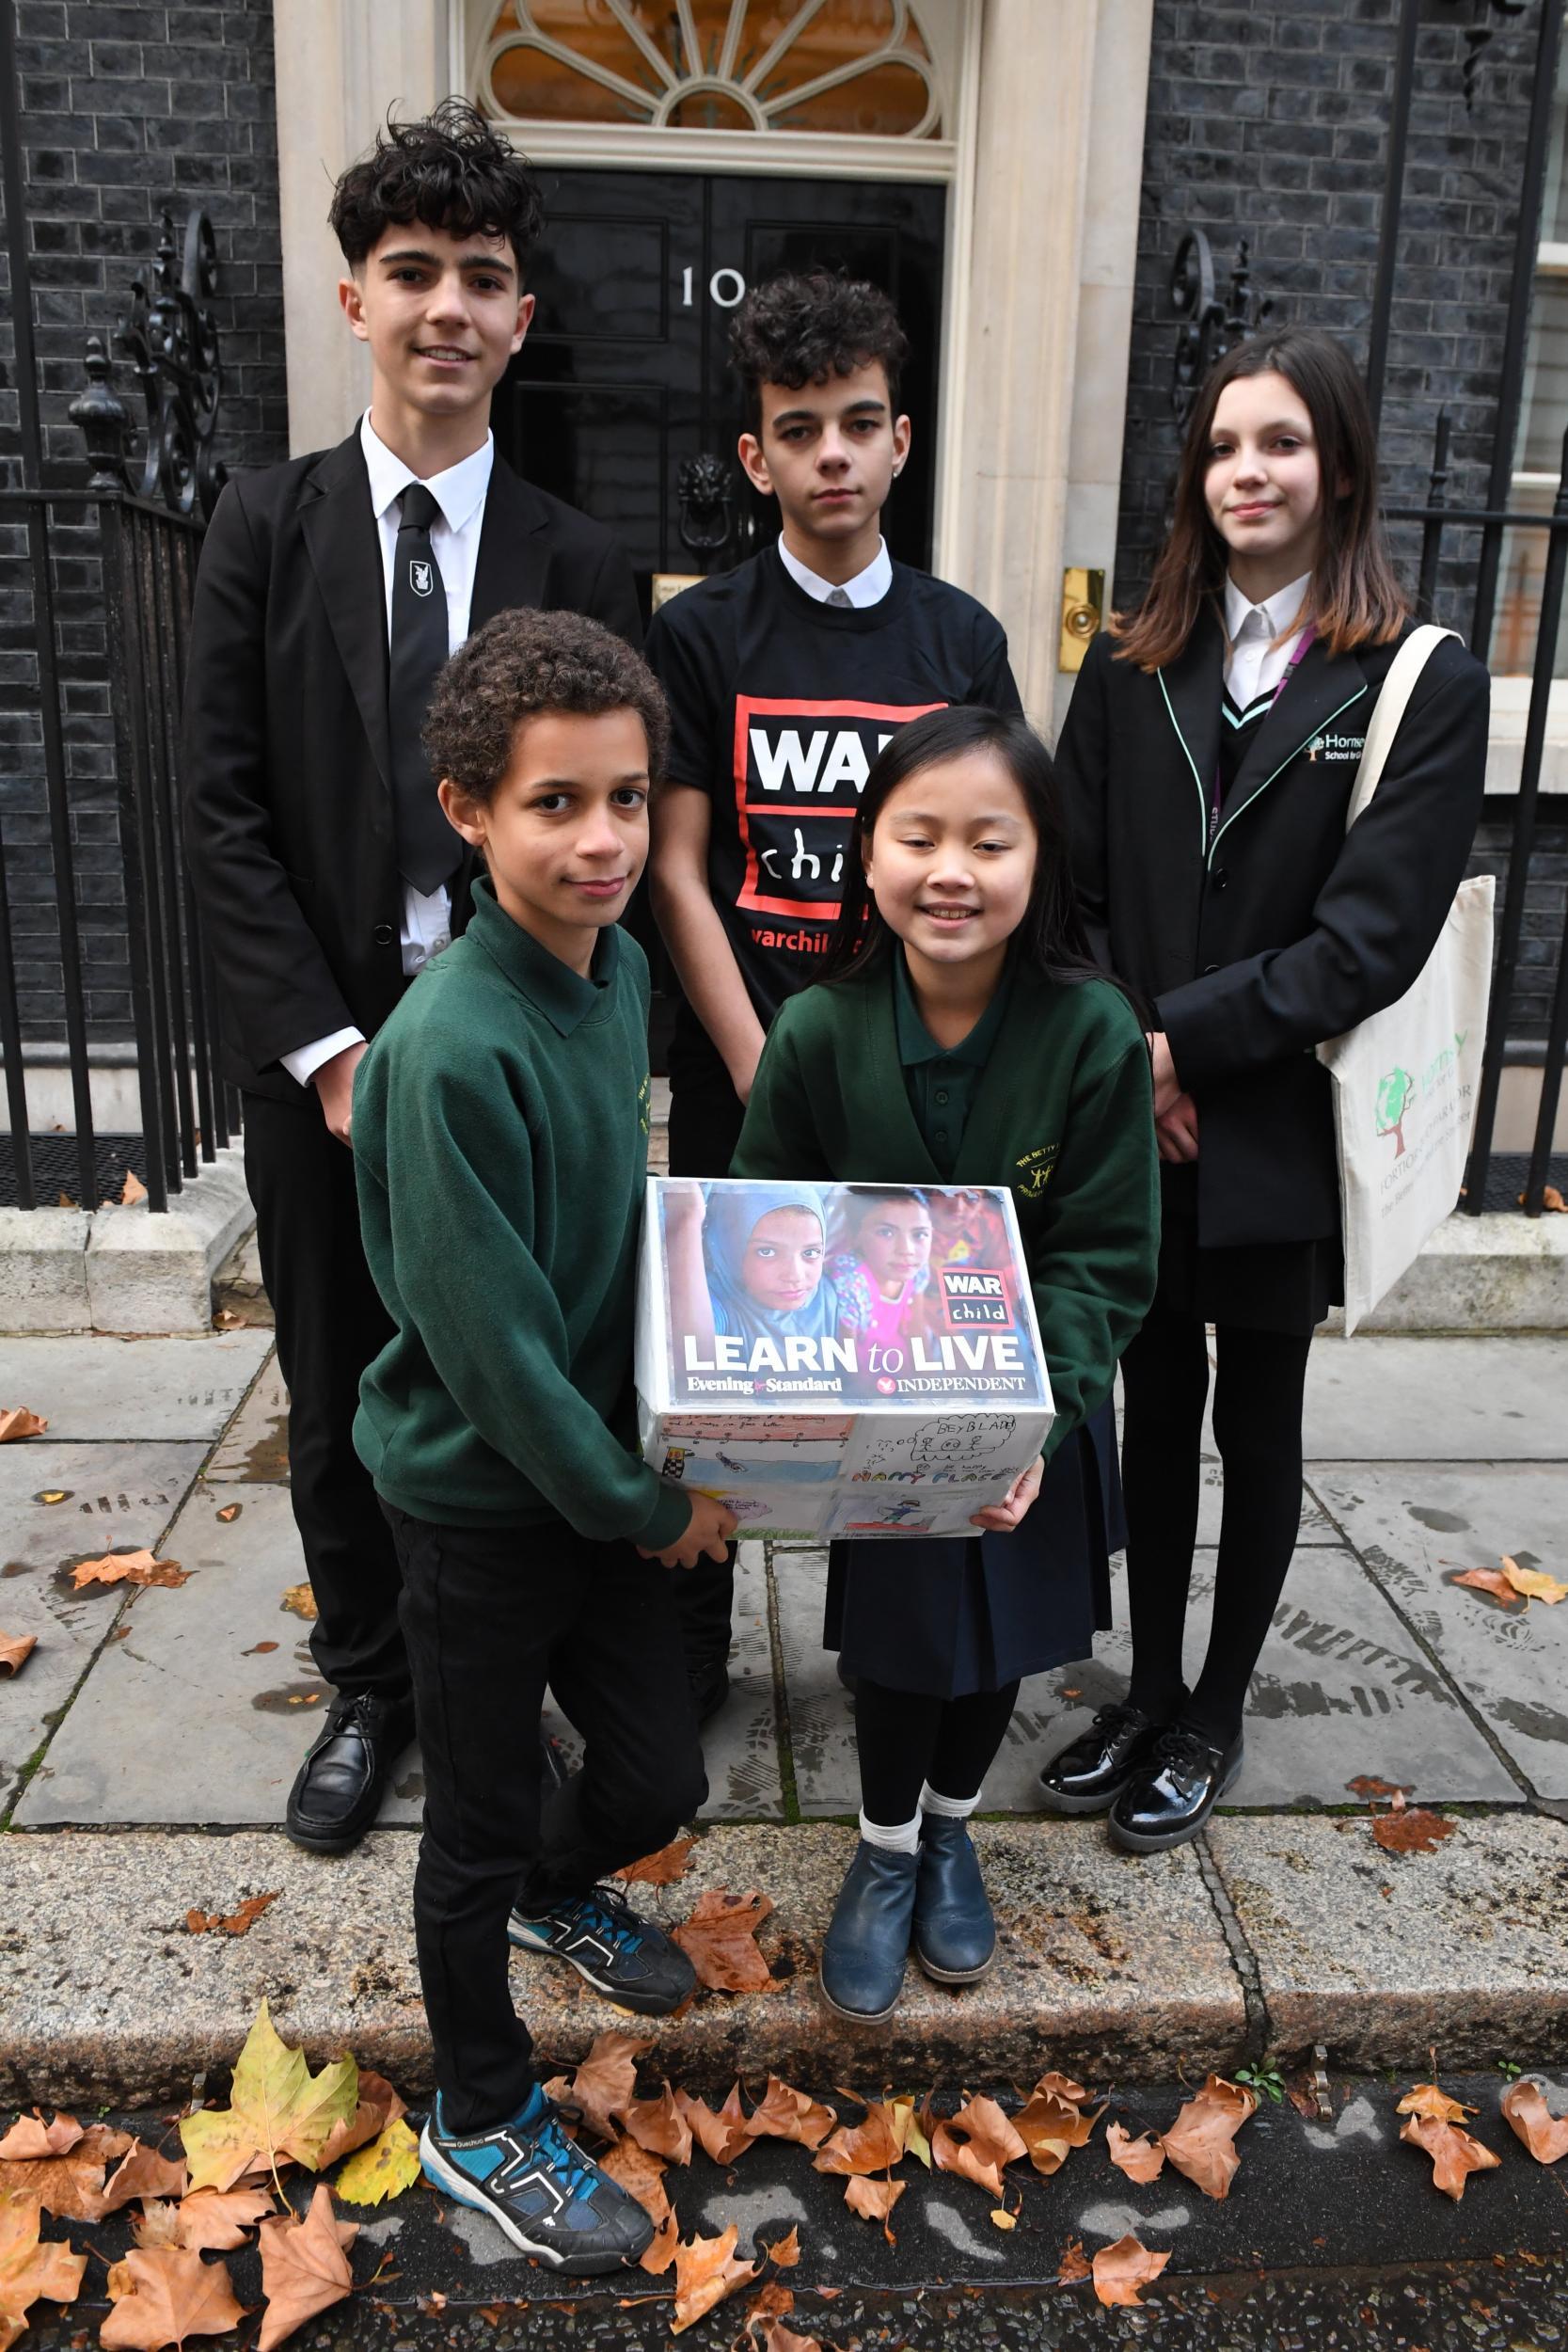 Pupils from four London schools in our campaign hand-delivered more than 700 letters and our petition to the prime minister